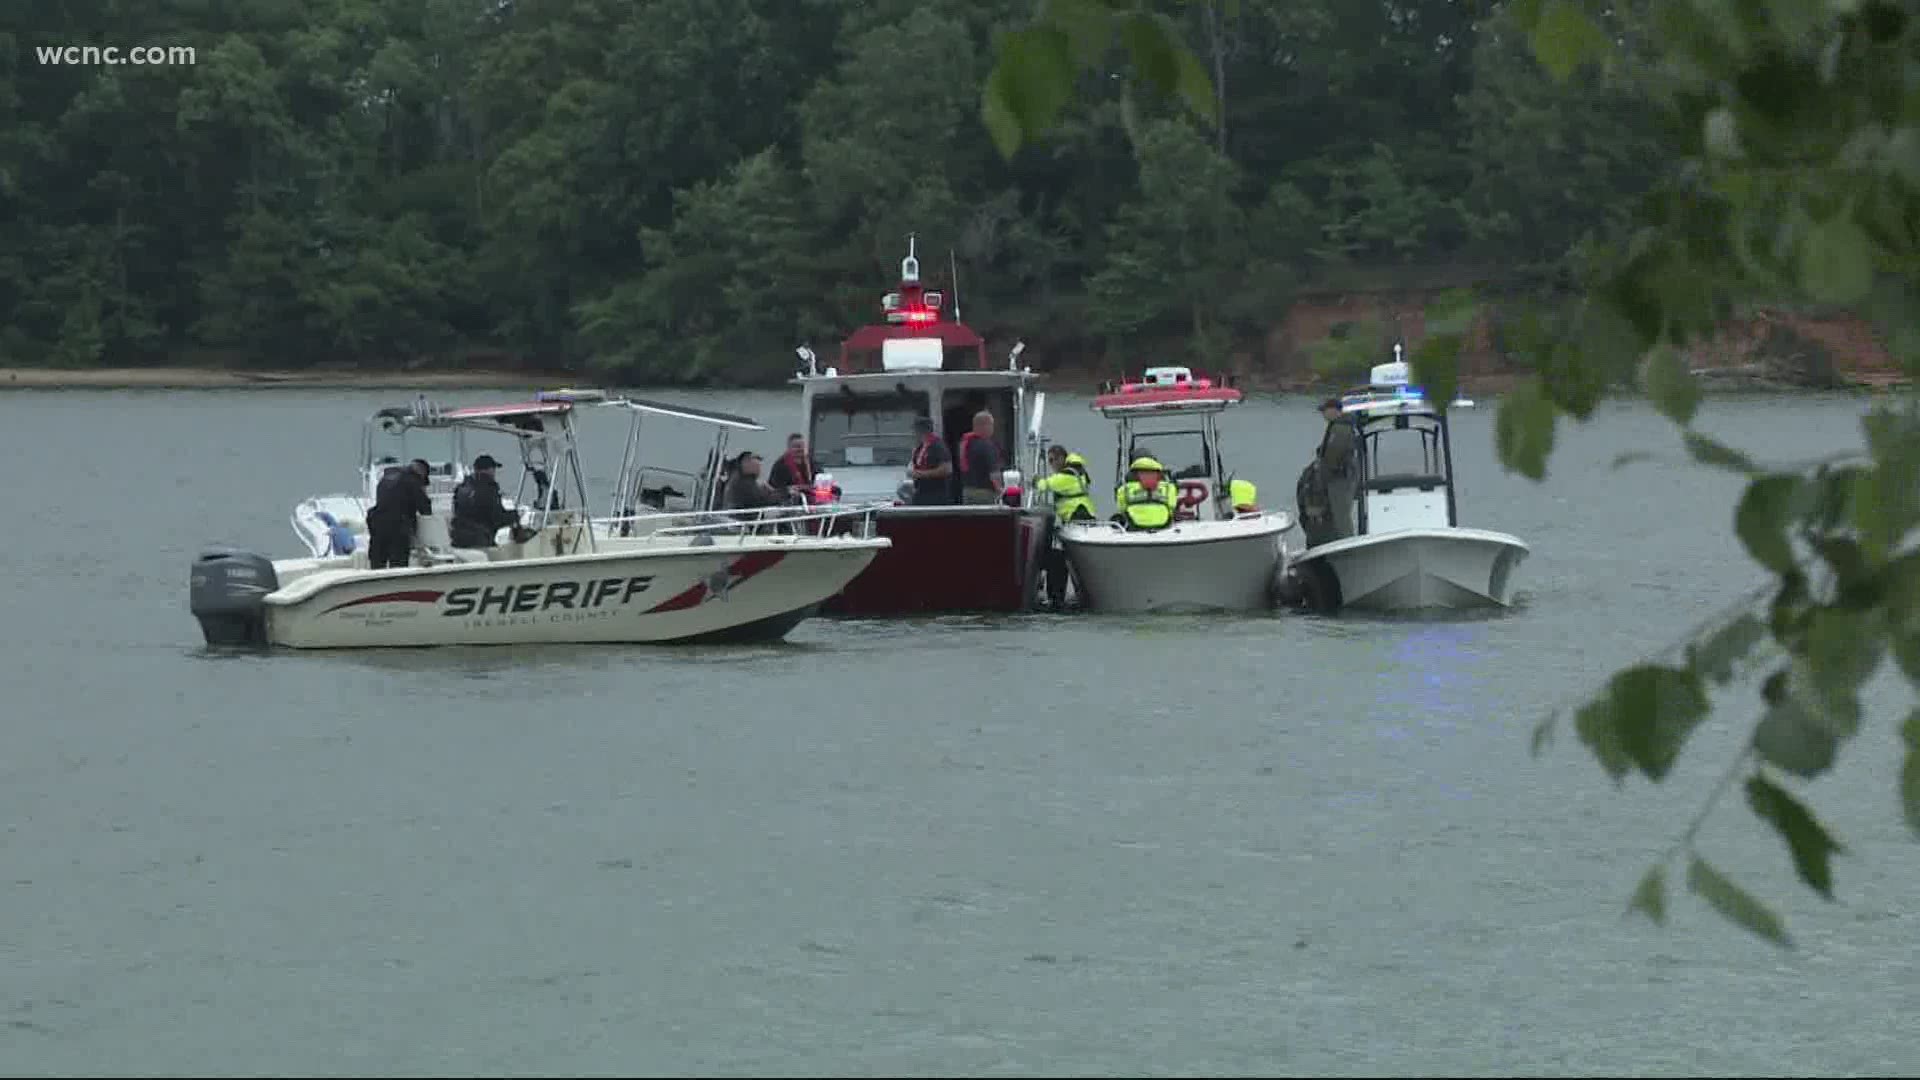 "Wear your life jacket." That's the reminder from safety officials who have already responded to four drownings this year on Lake Norman, three more than all of 2019